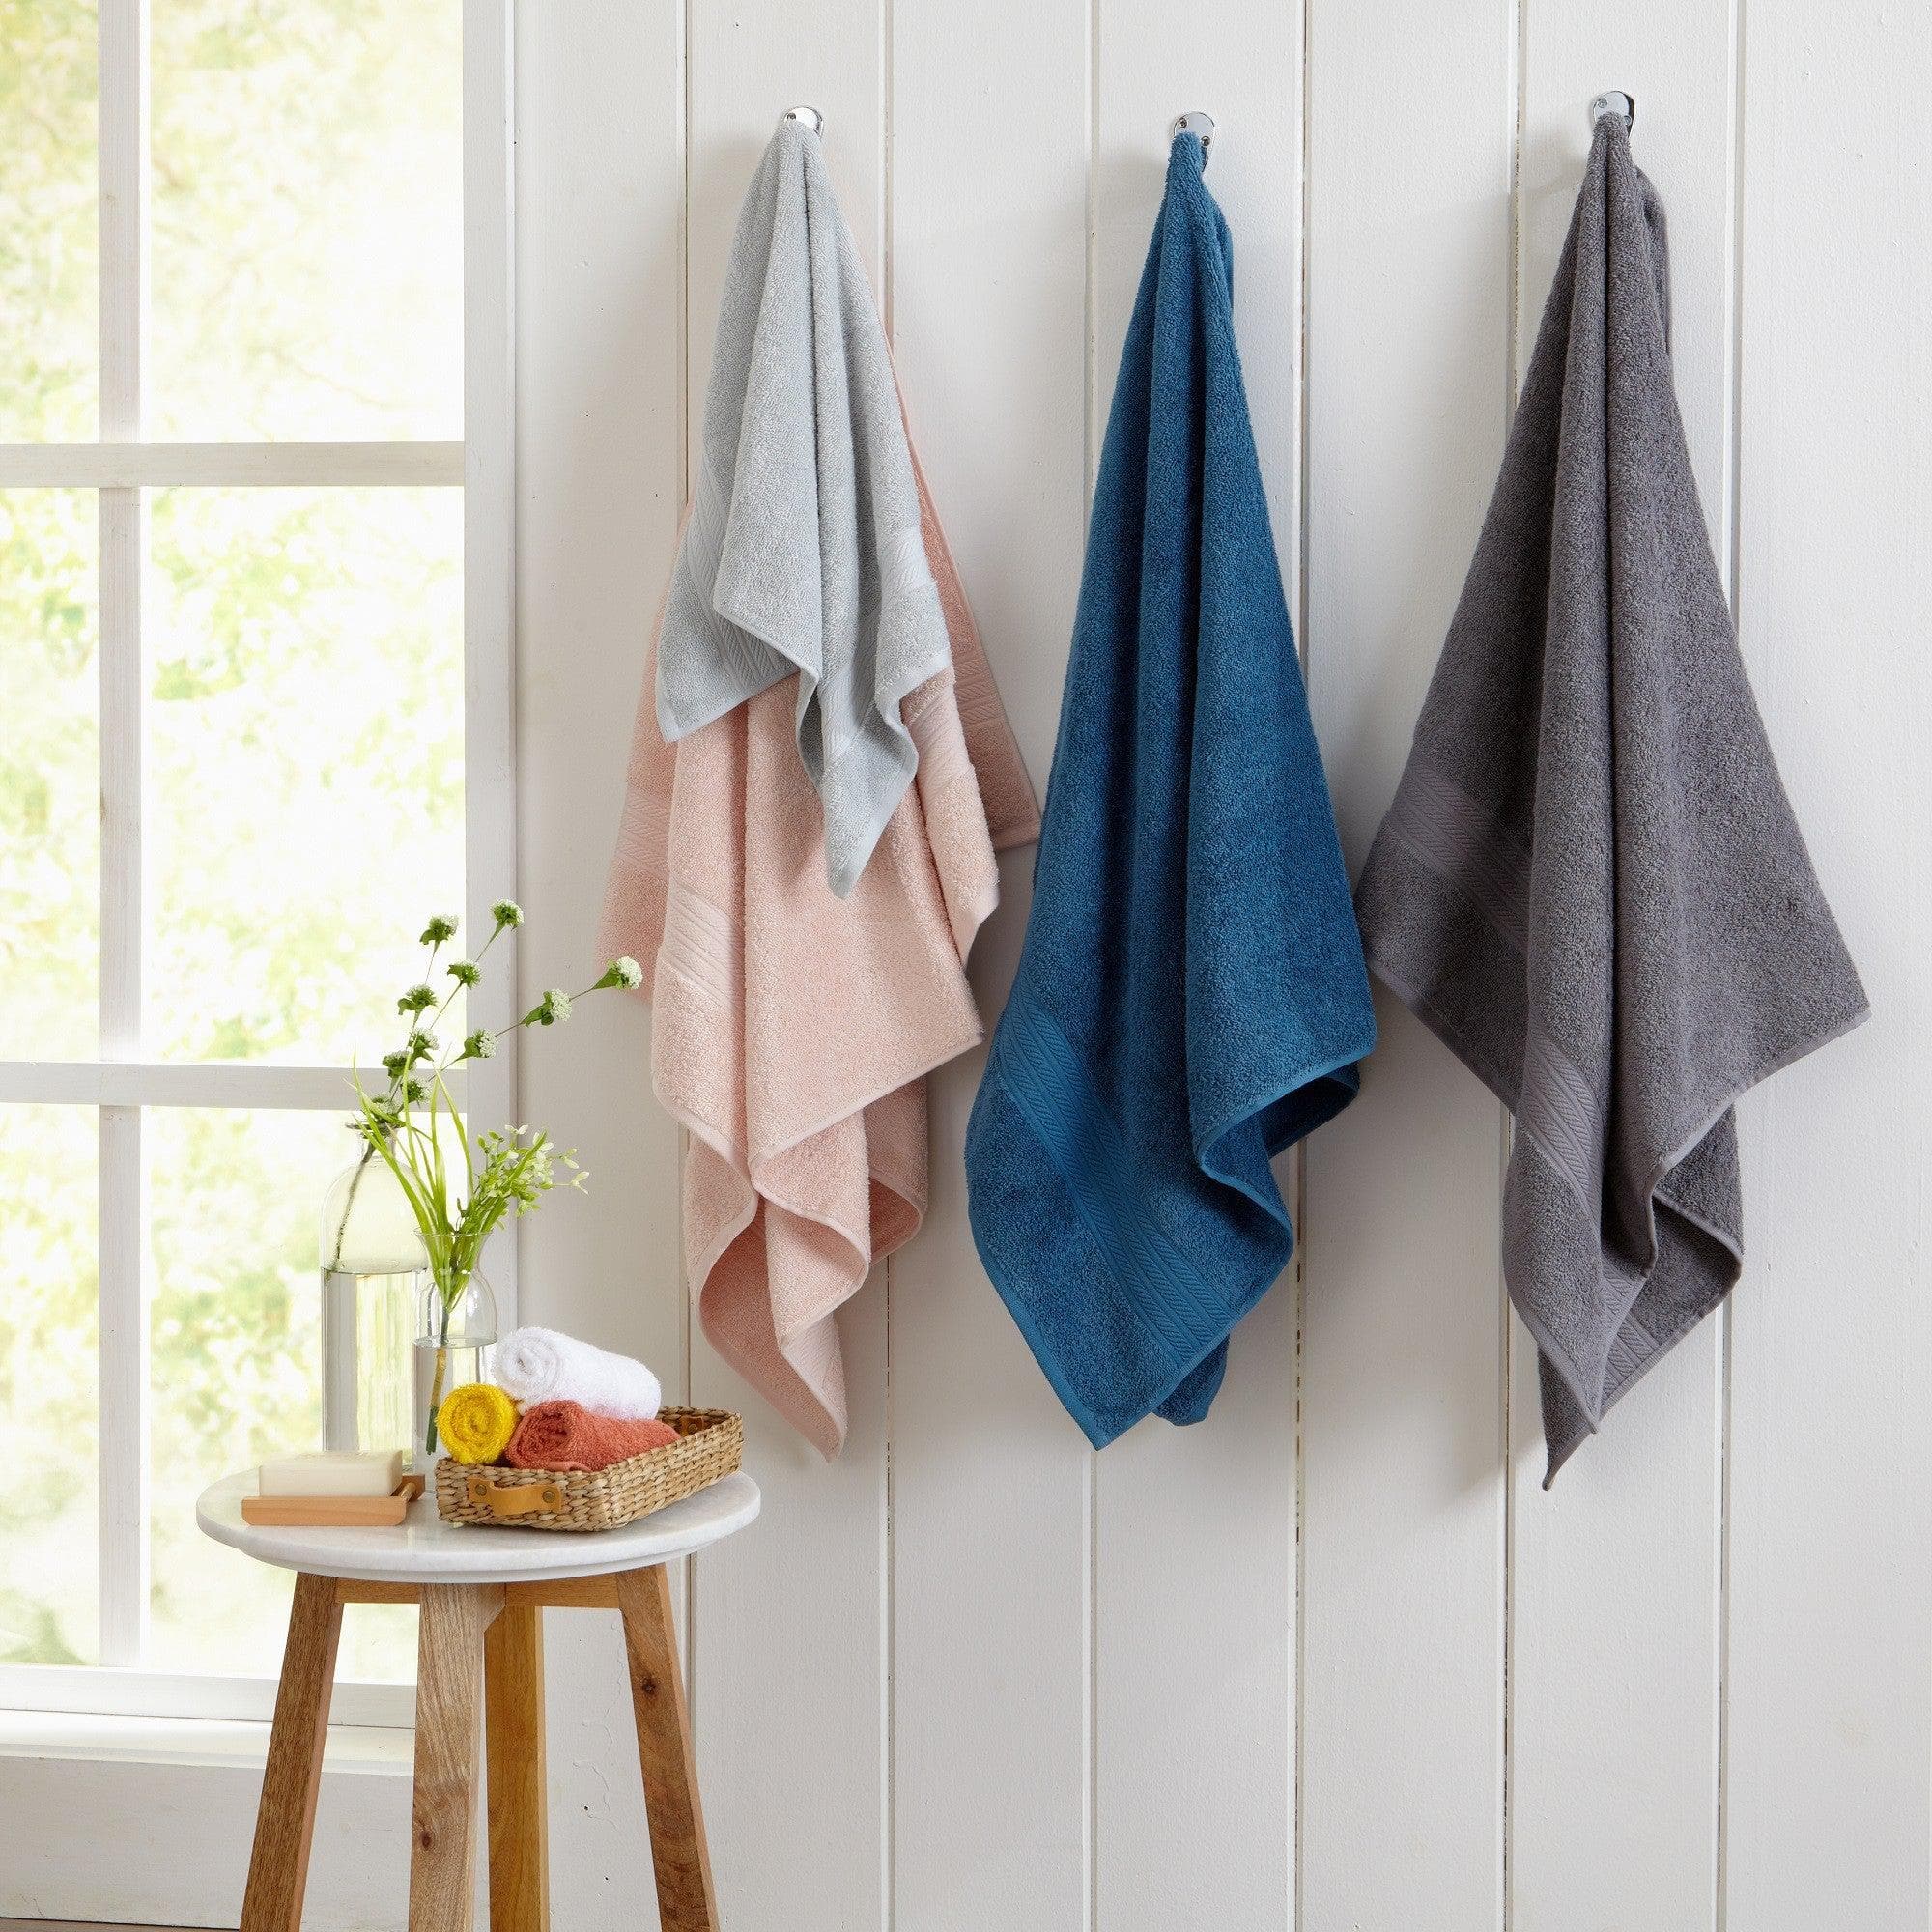 Eco-Friendly Cotton Bath Towel  PureSoft Collection by Great Bay Home